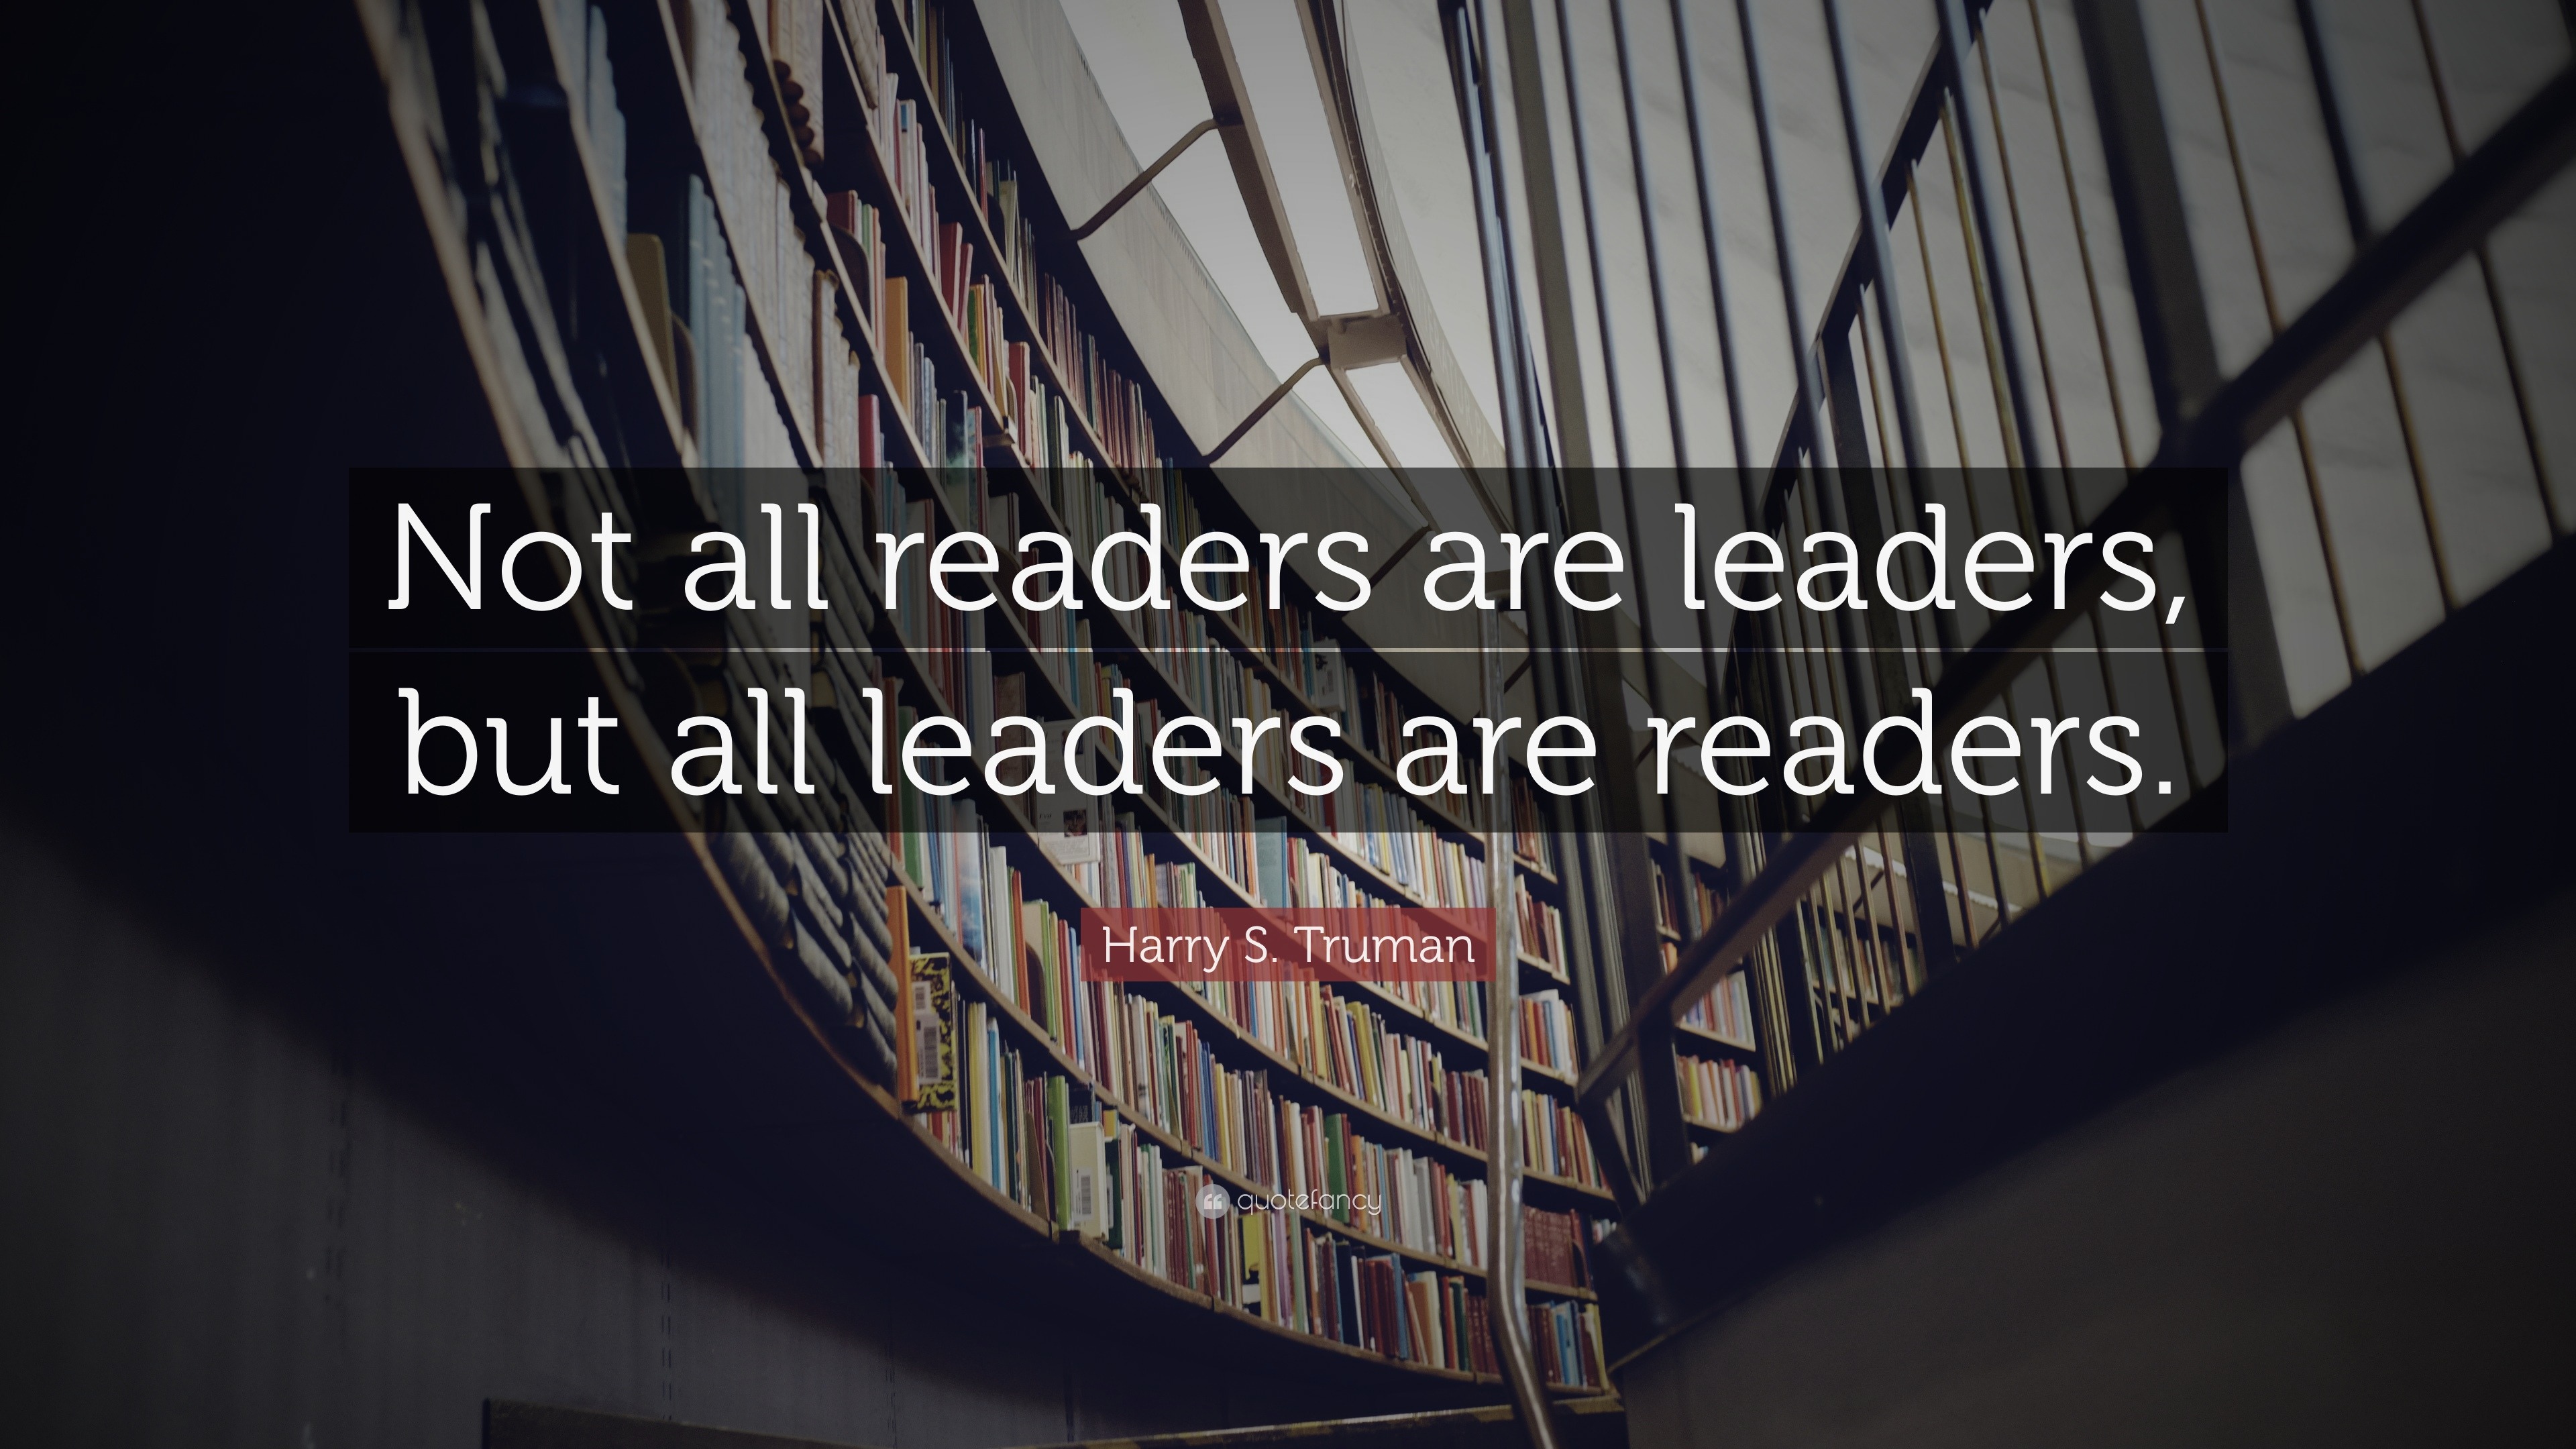 Harry S. Truman Quote: “Not all readers are leaders, but all leaders ...